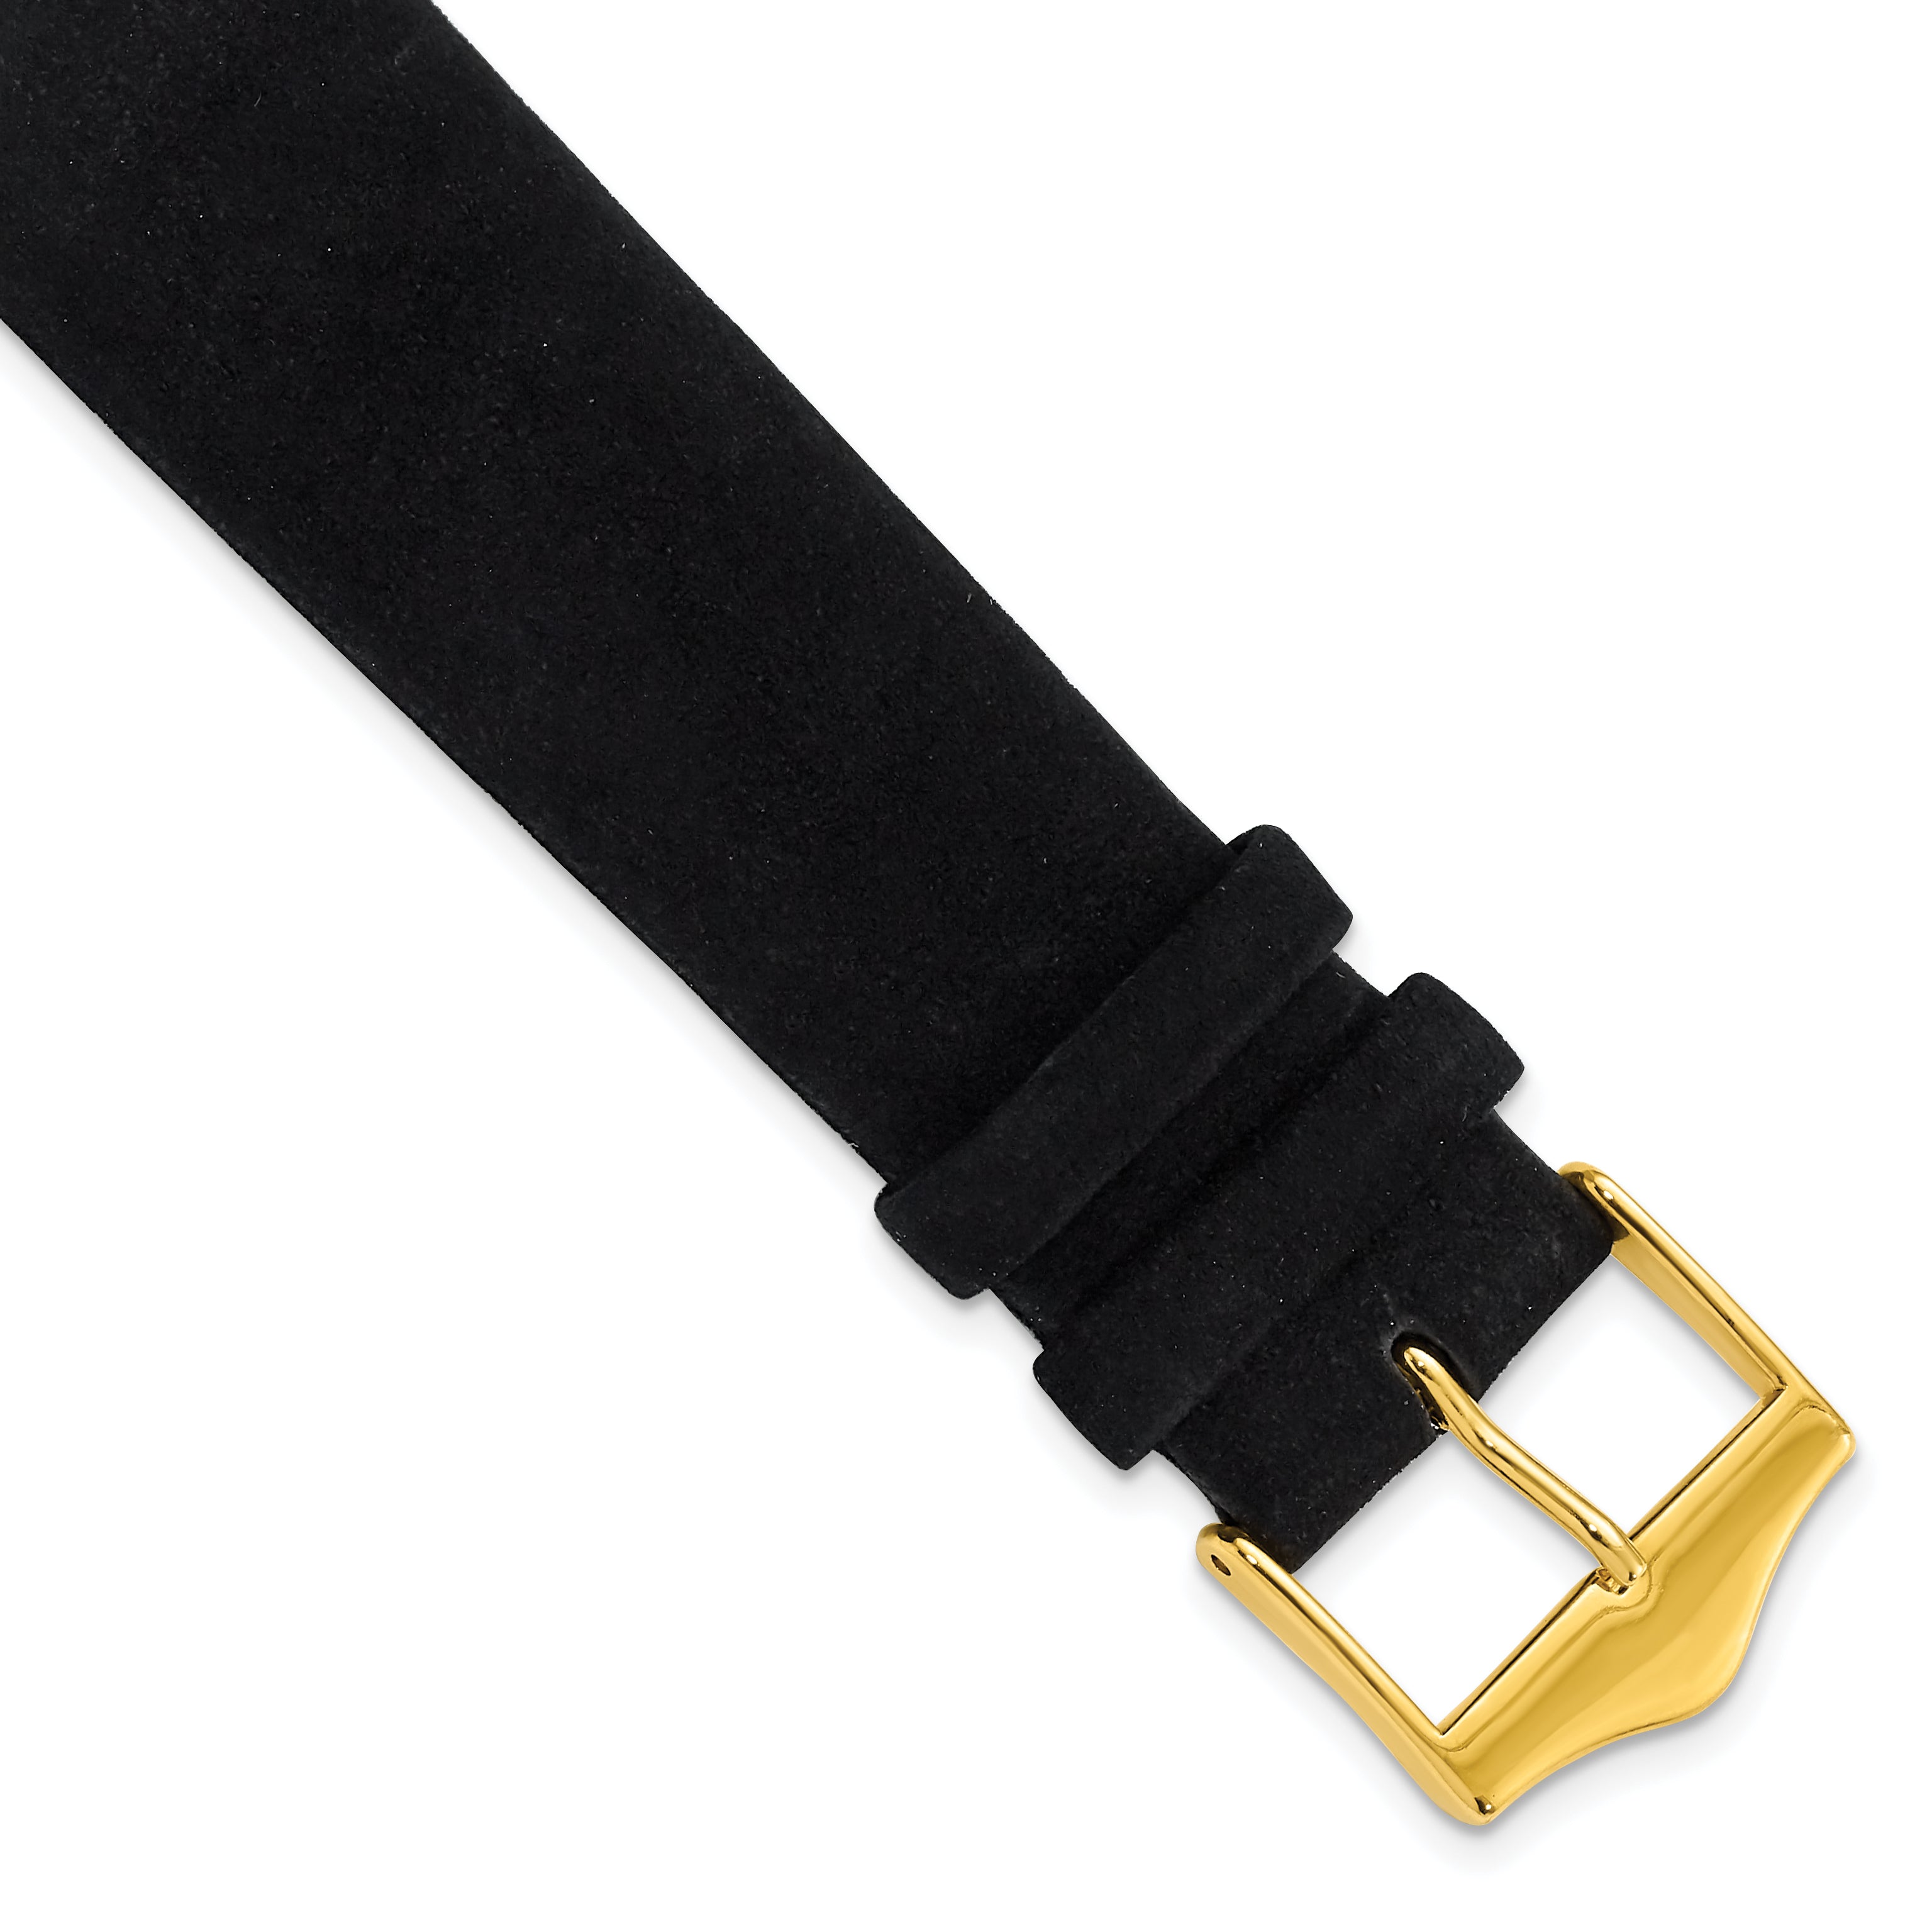 DeBeer 20mm Black Suede Flat Leather with Gold-tone Buckle 7.75 inch Watch Band